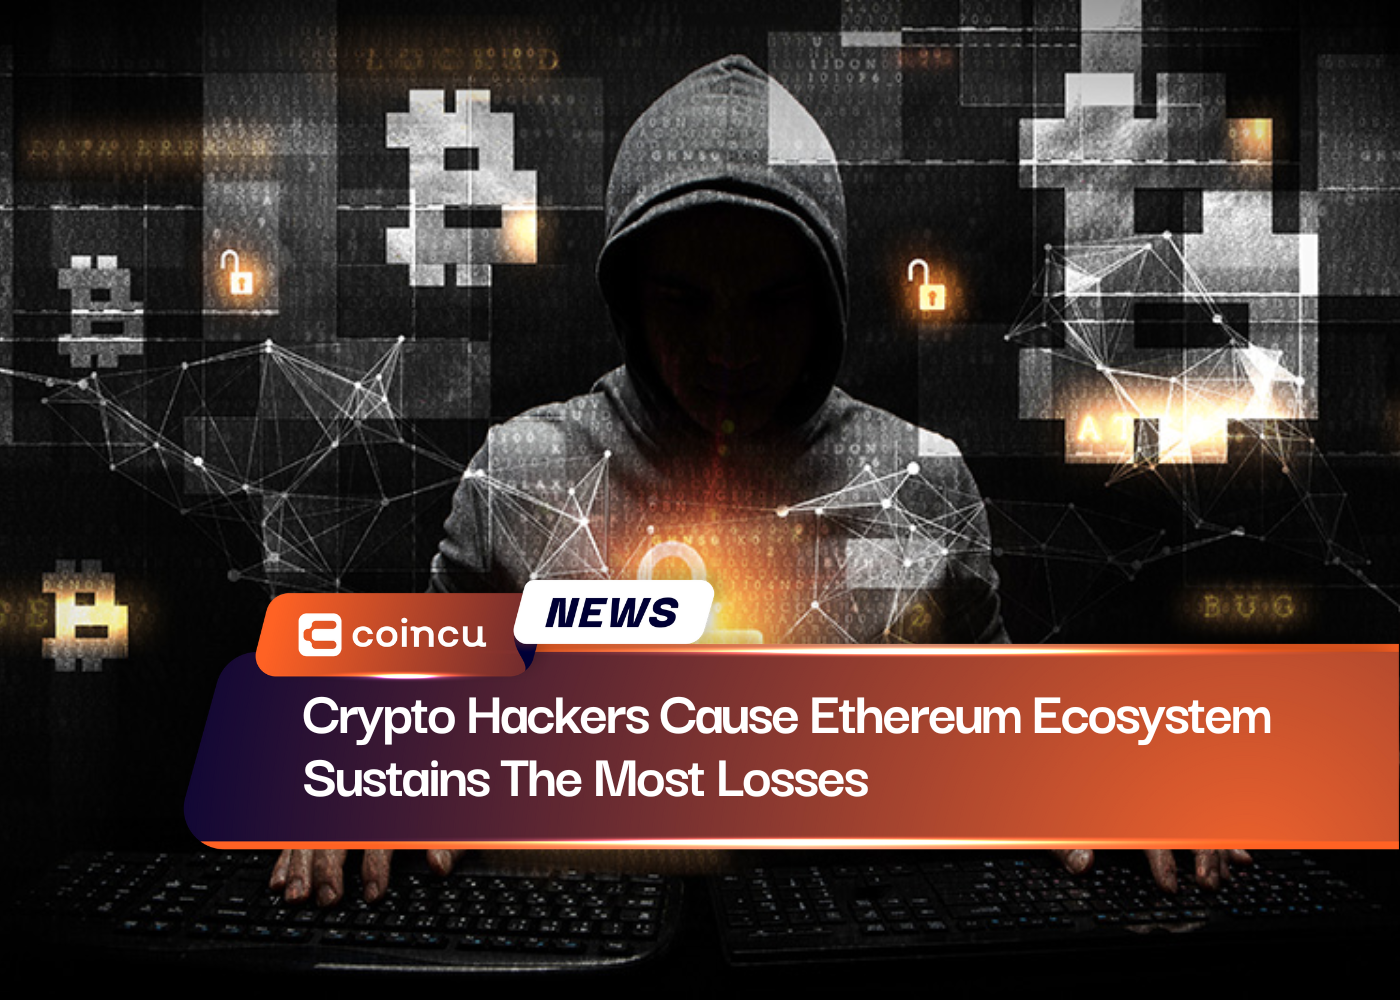 Crypto Hackers Cause Ethereum Ecosystem Sustains The Most Losses